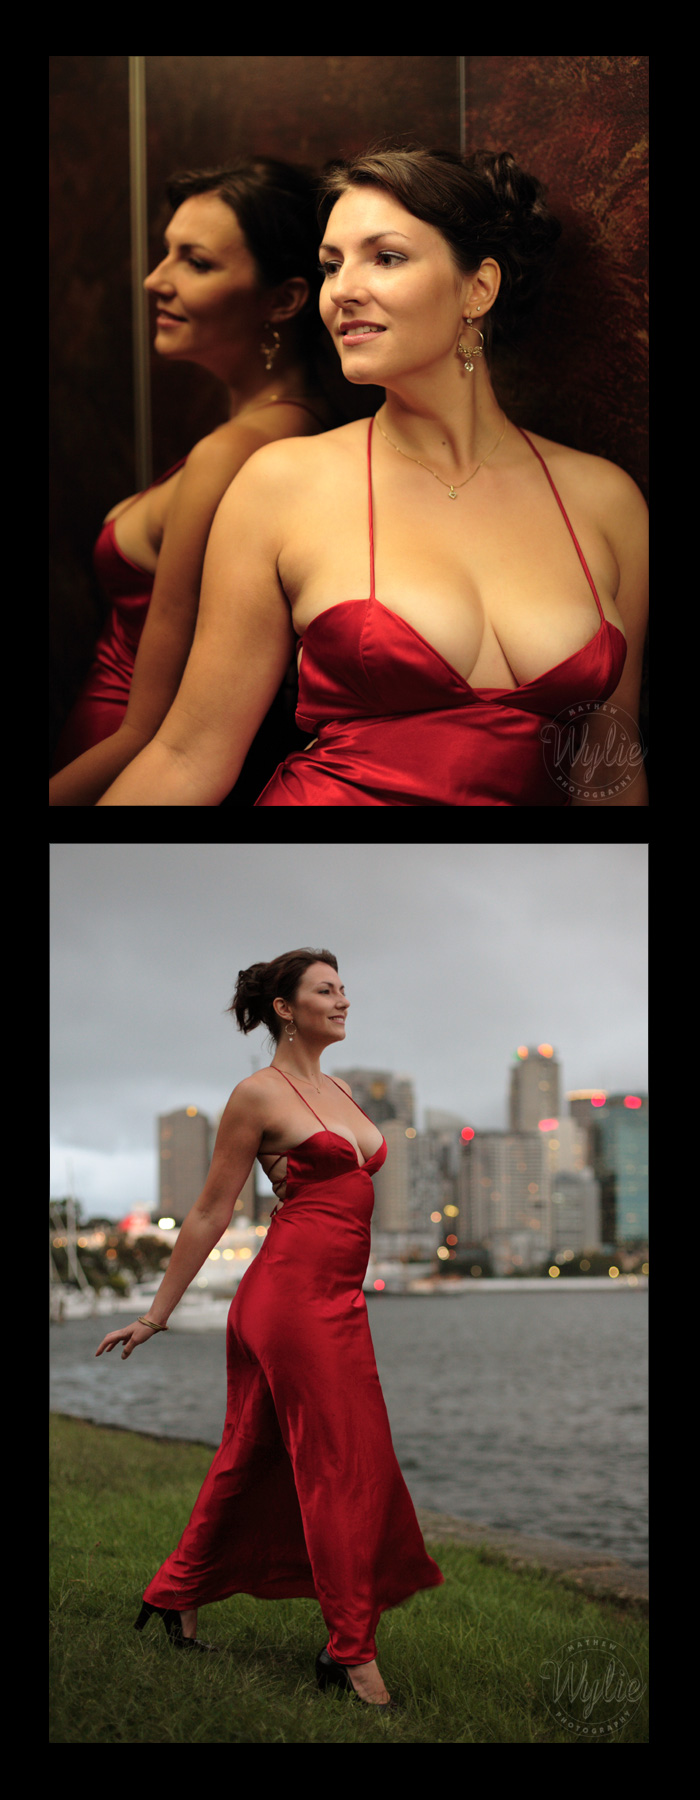 Male and Female model photo shoot of the Red Dress Project and KARINS by mathew wylie in balmain